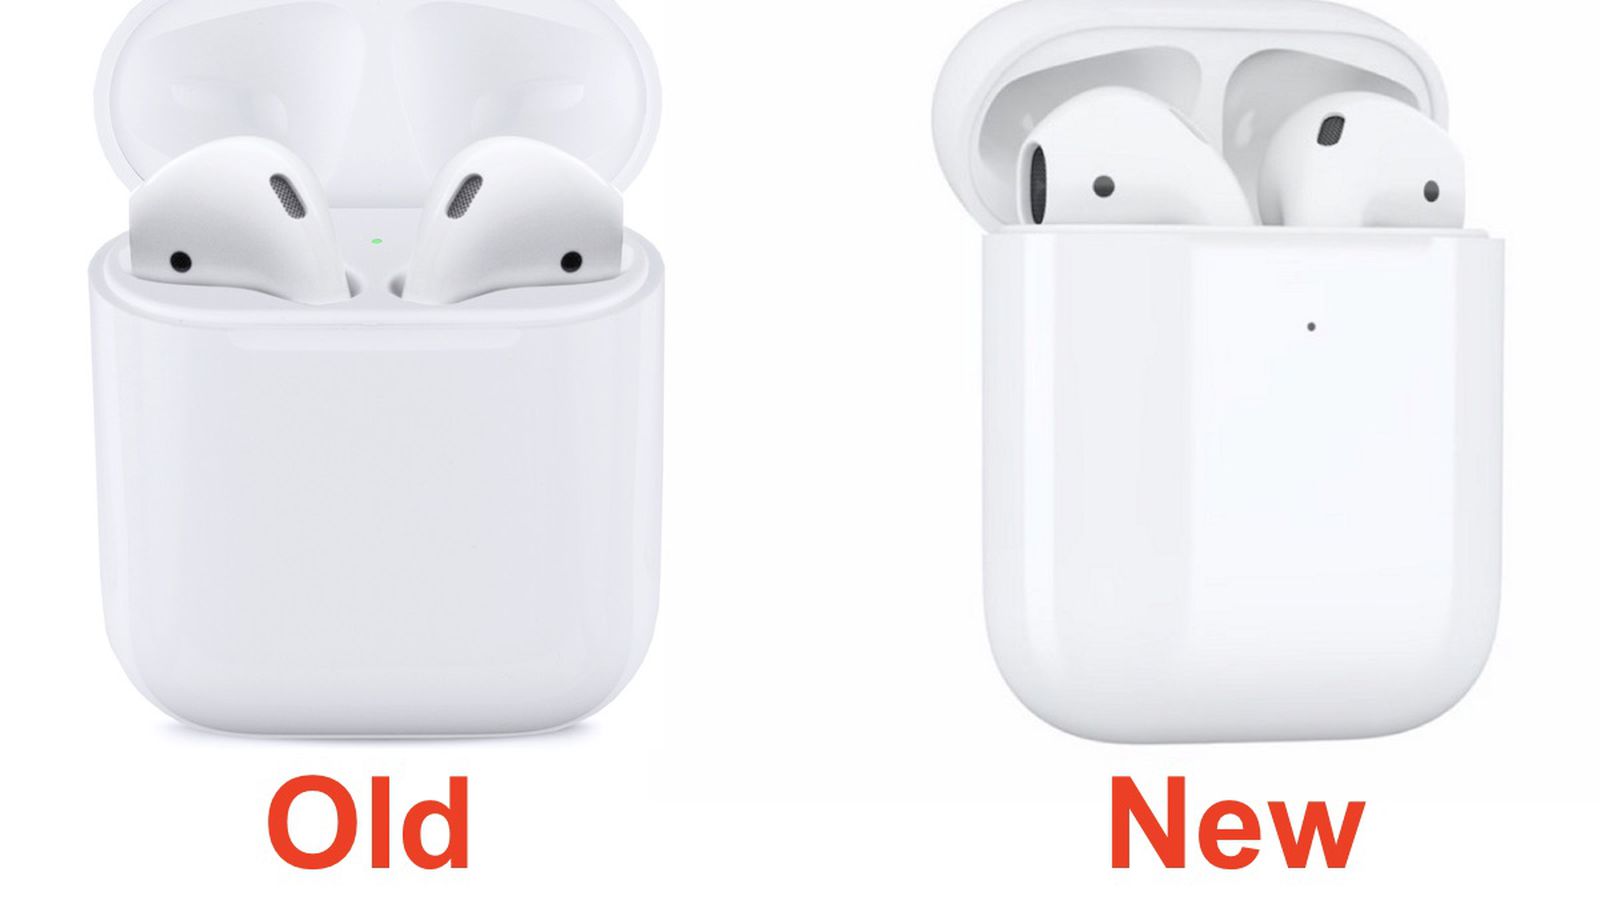 Here's Your Look at the New Version Apple's AirPods - MacRumors